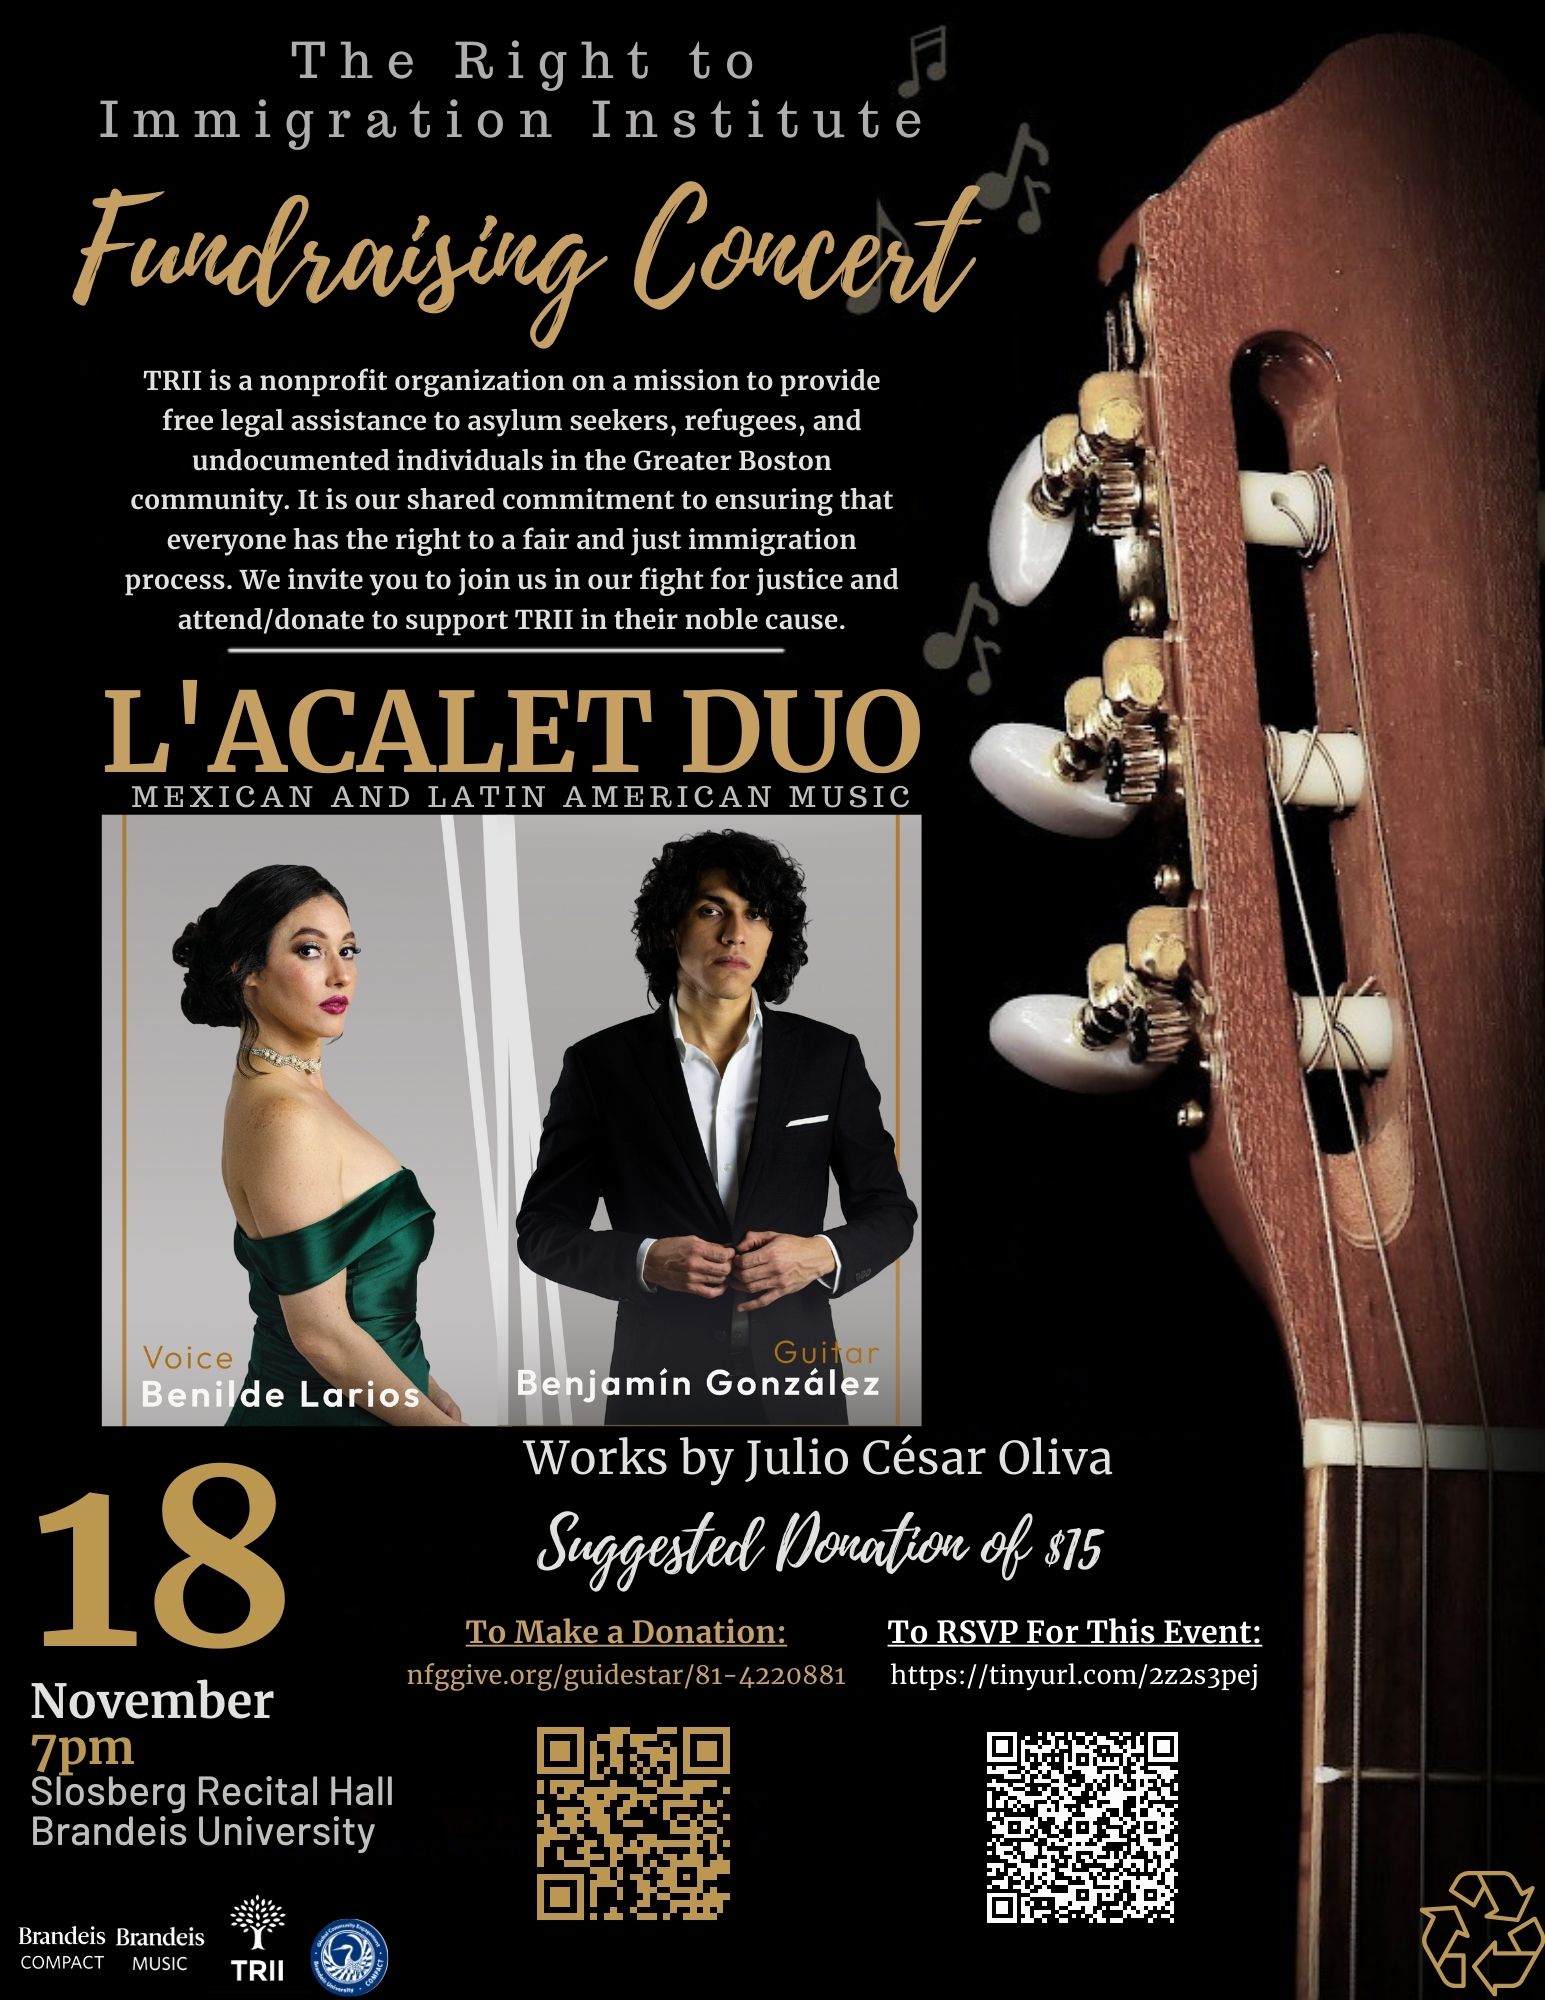 The Right to Immigration Institute TRII Fundraising Concert poster